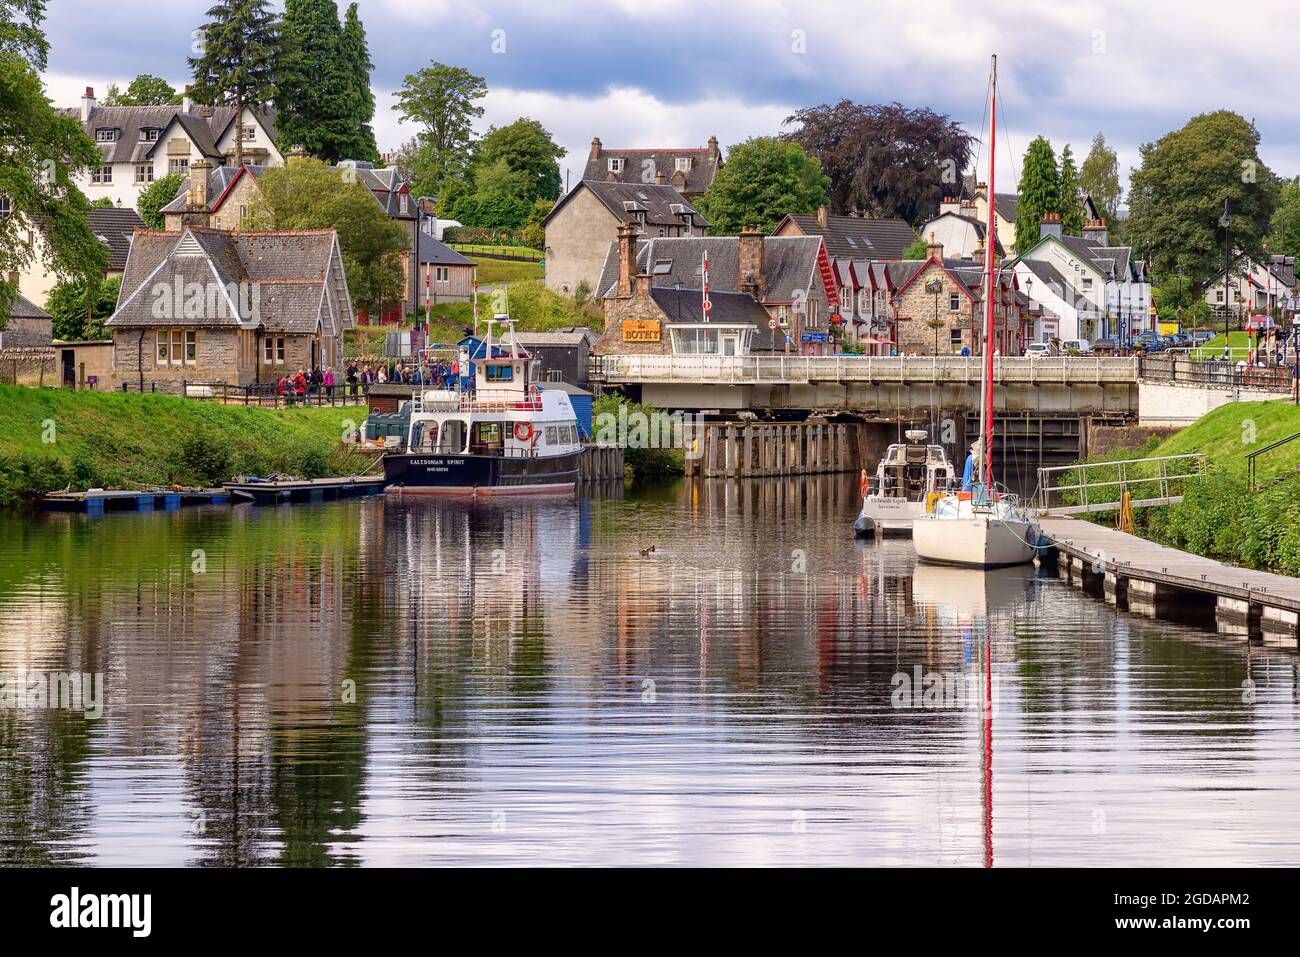 Fort Augustus, United Kingdom - August 19, 2014: The Caledonian canal at the Loch Ness lake. The Canal connects the Scottish east coast at Inverness Stock Photo